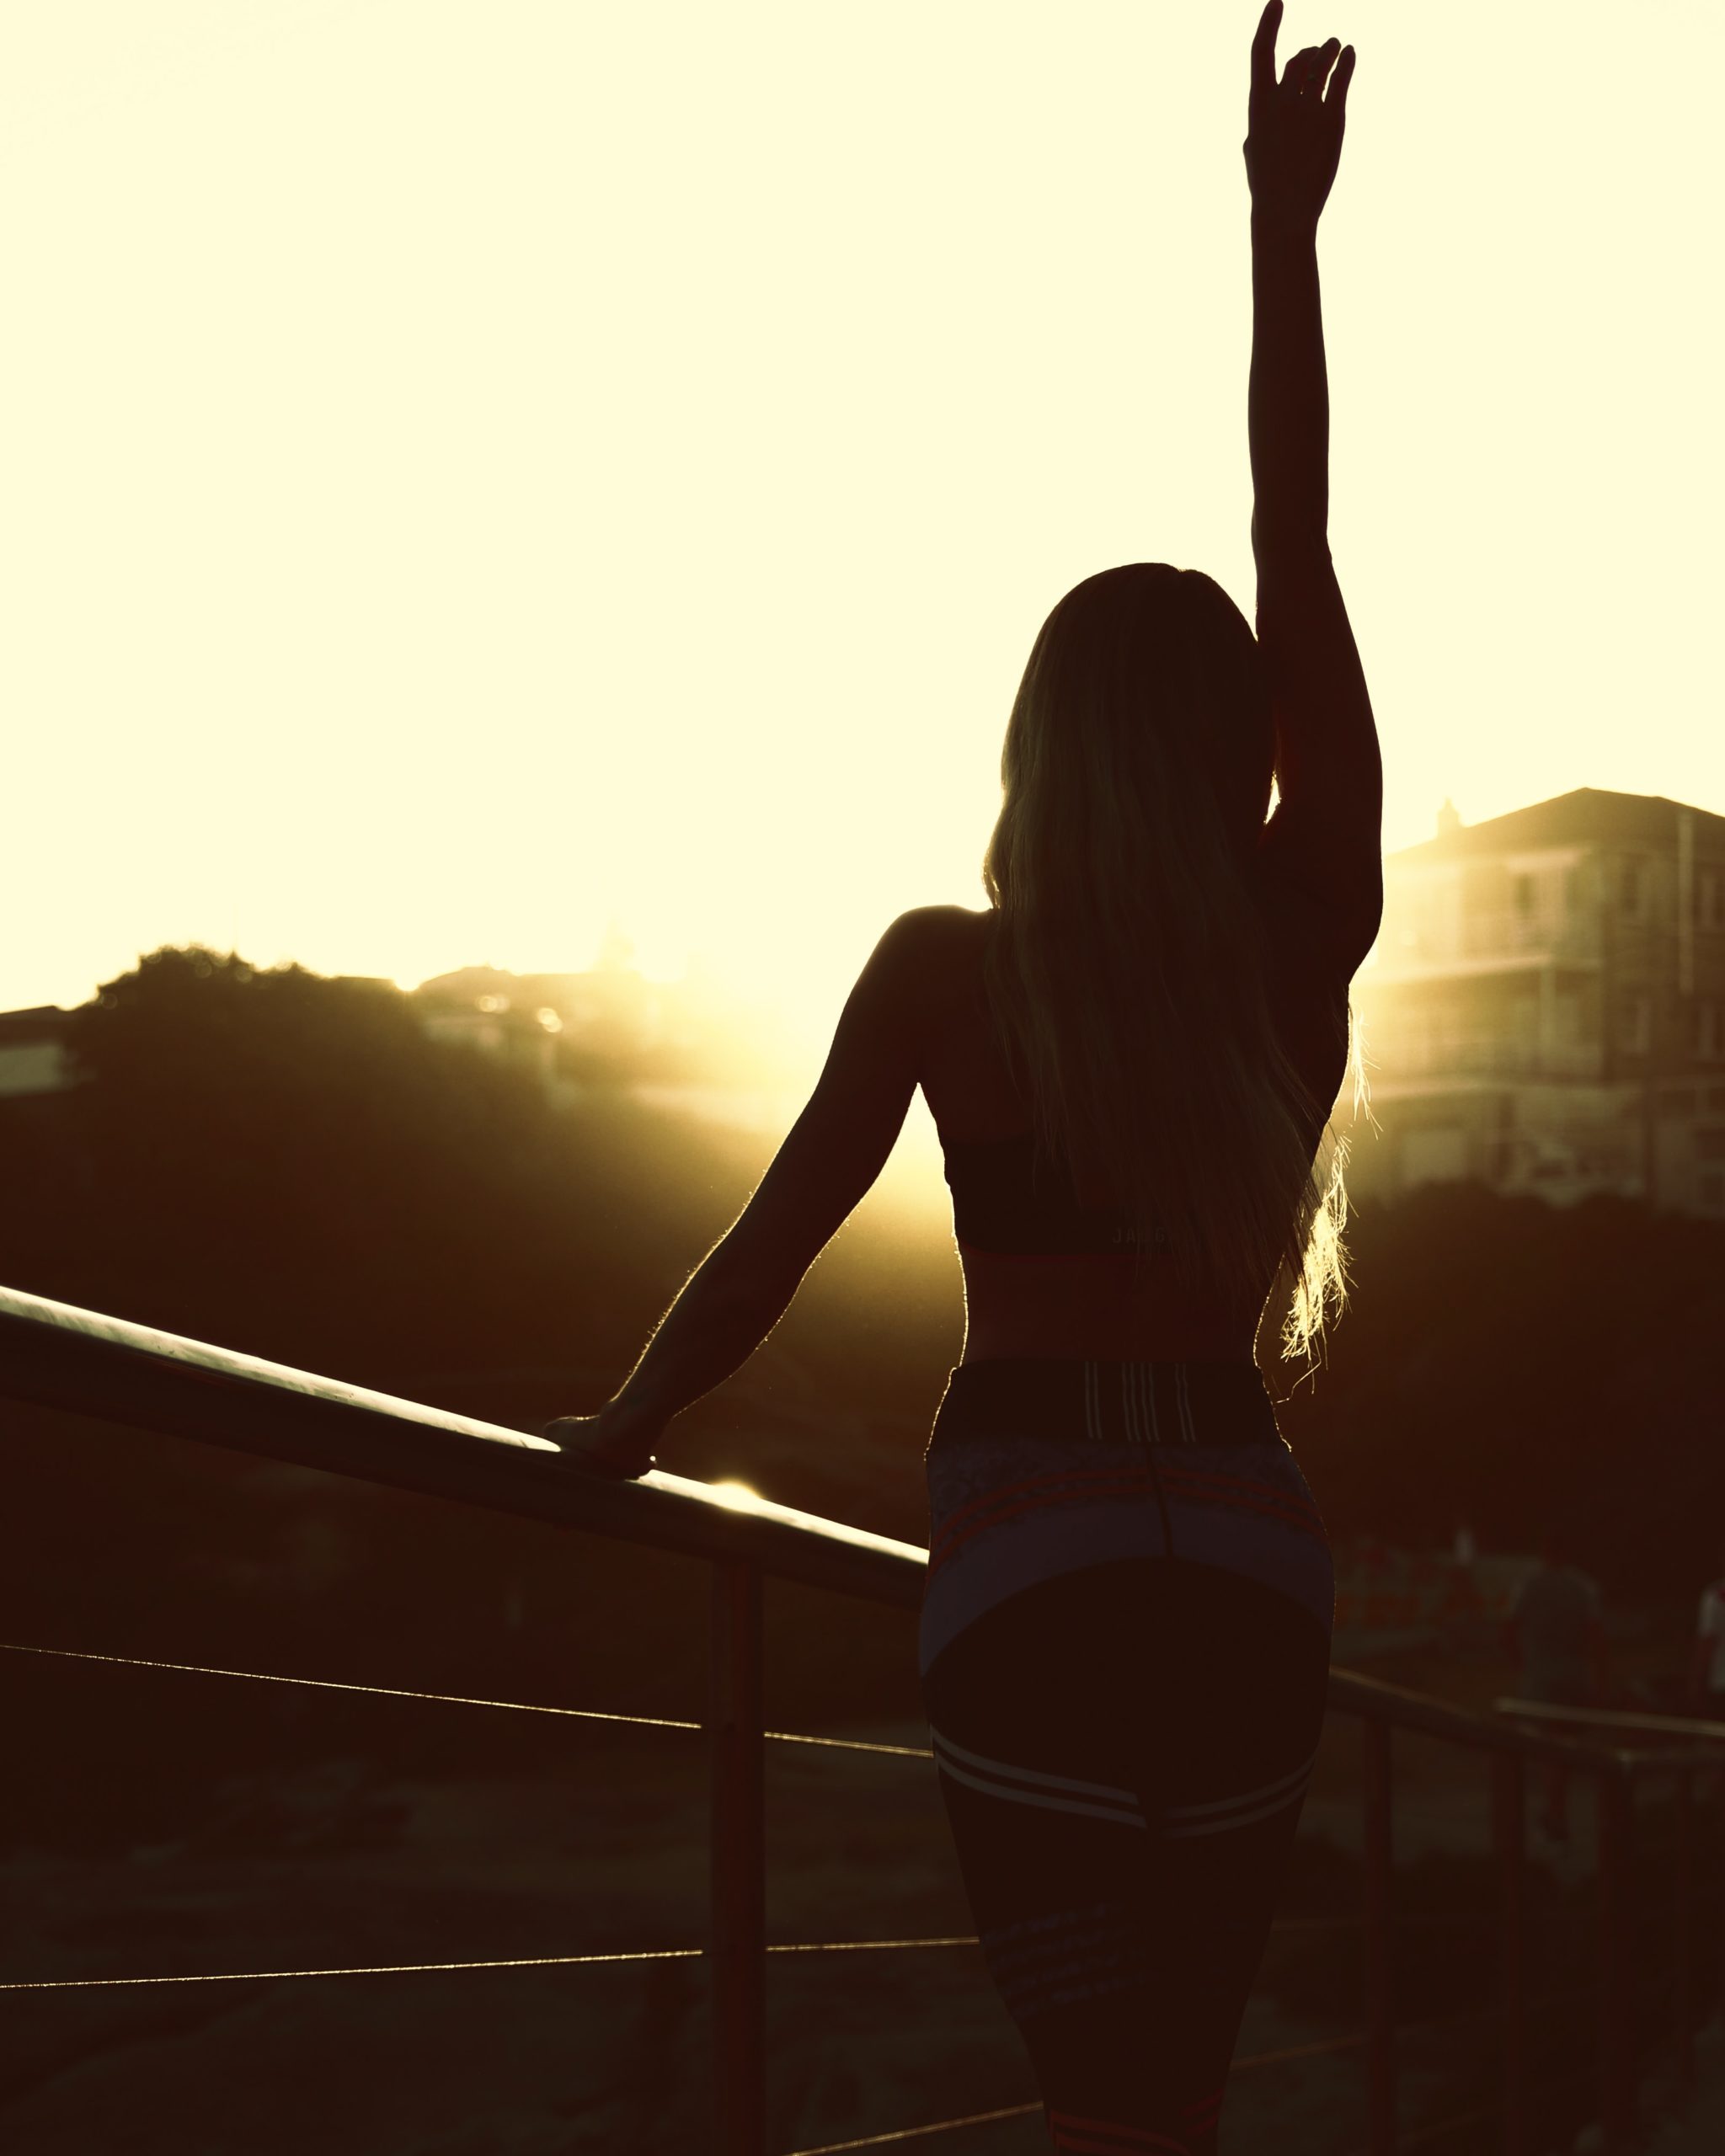 Unsplash photo by Nathaniel Vala - woman in tank top and black shorts standing on balcony during sunset - physical stamina to journey through hard things